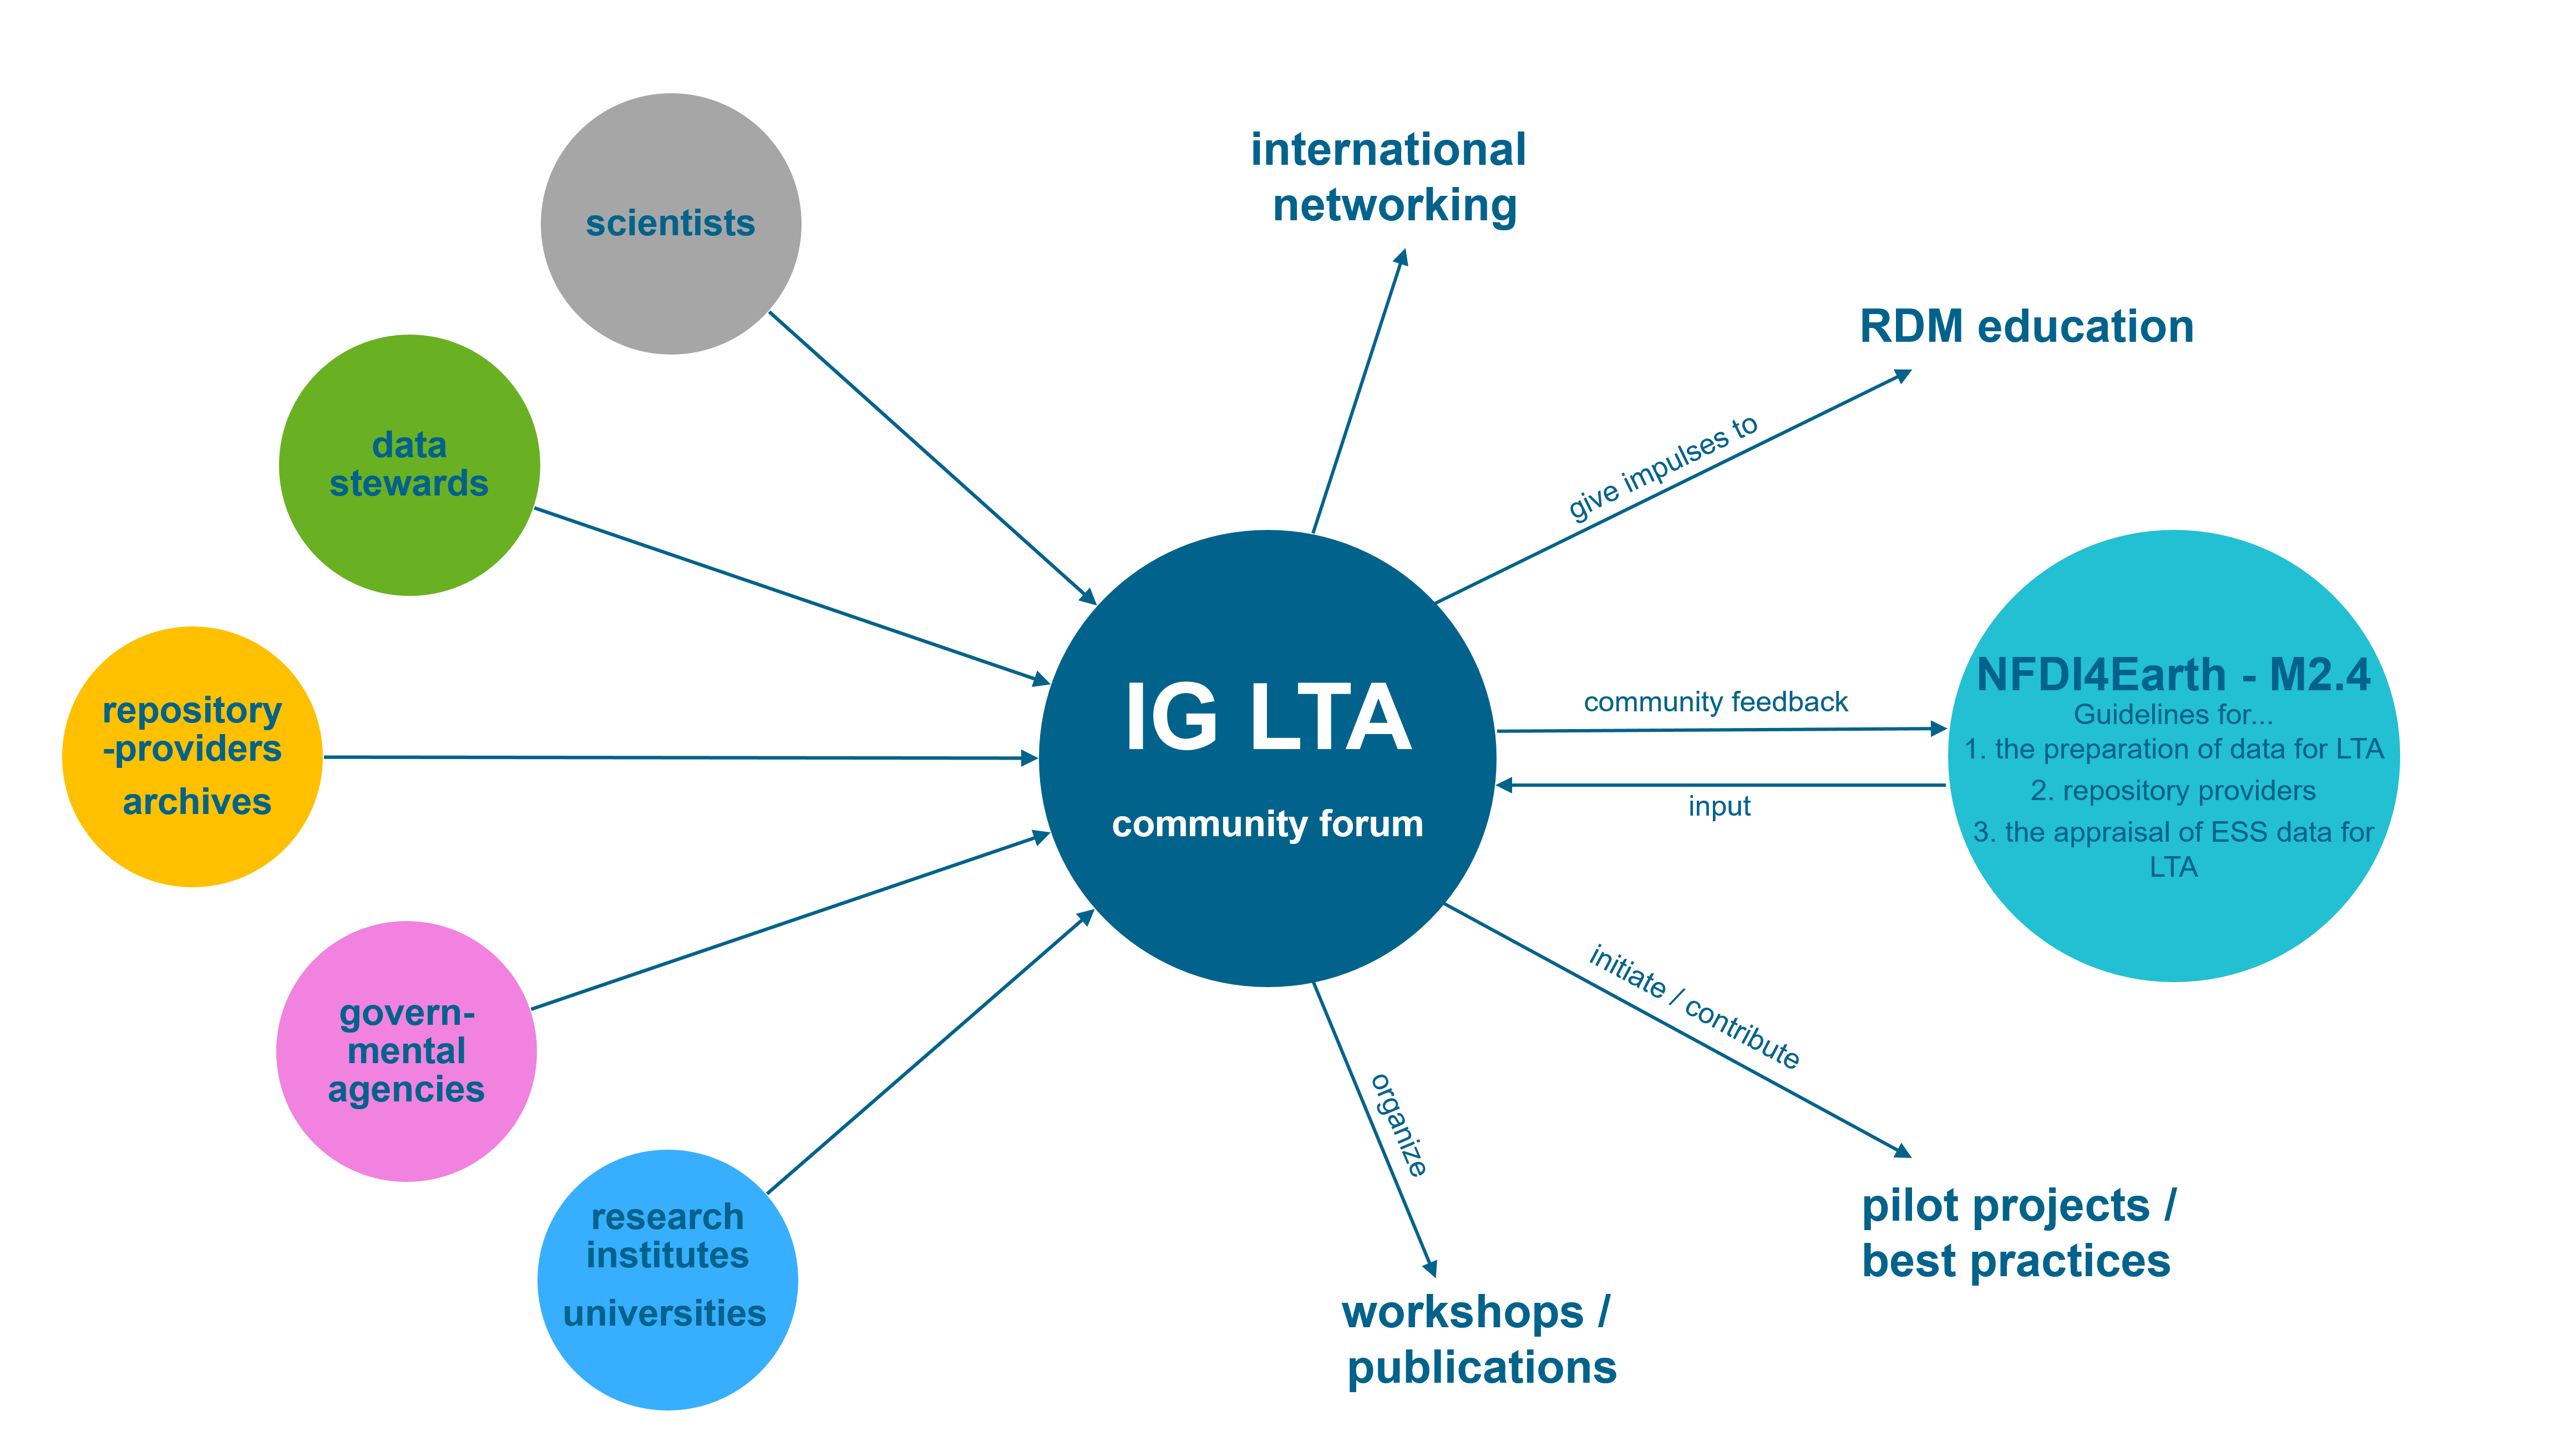 Chart with the stakeholders, interactions, and activities of the IG LTA. On the left side the stakeholders with whom the IG LTA interacts, on the left side the activities carried out by the IG, including interaction with the NFDI4Earth-Measure 2.4.